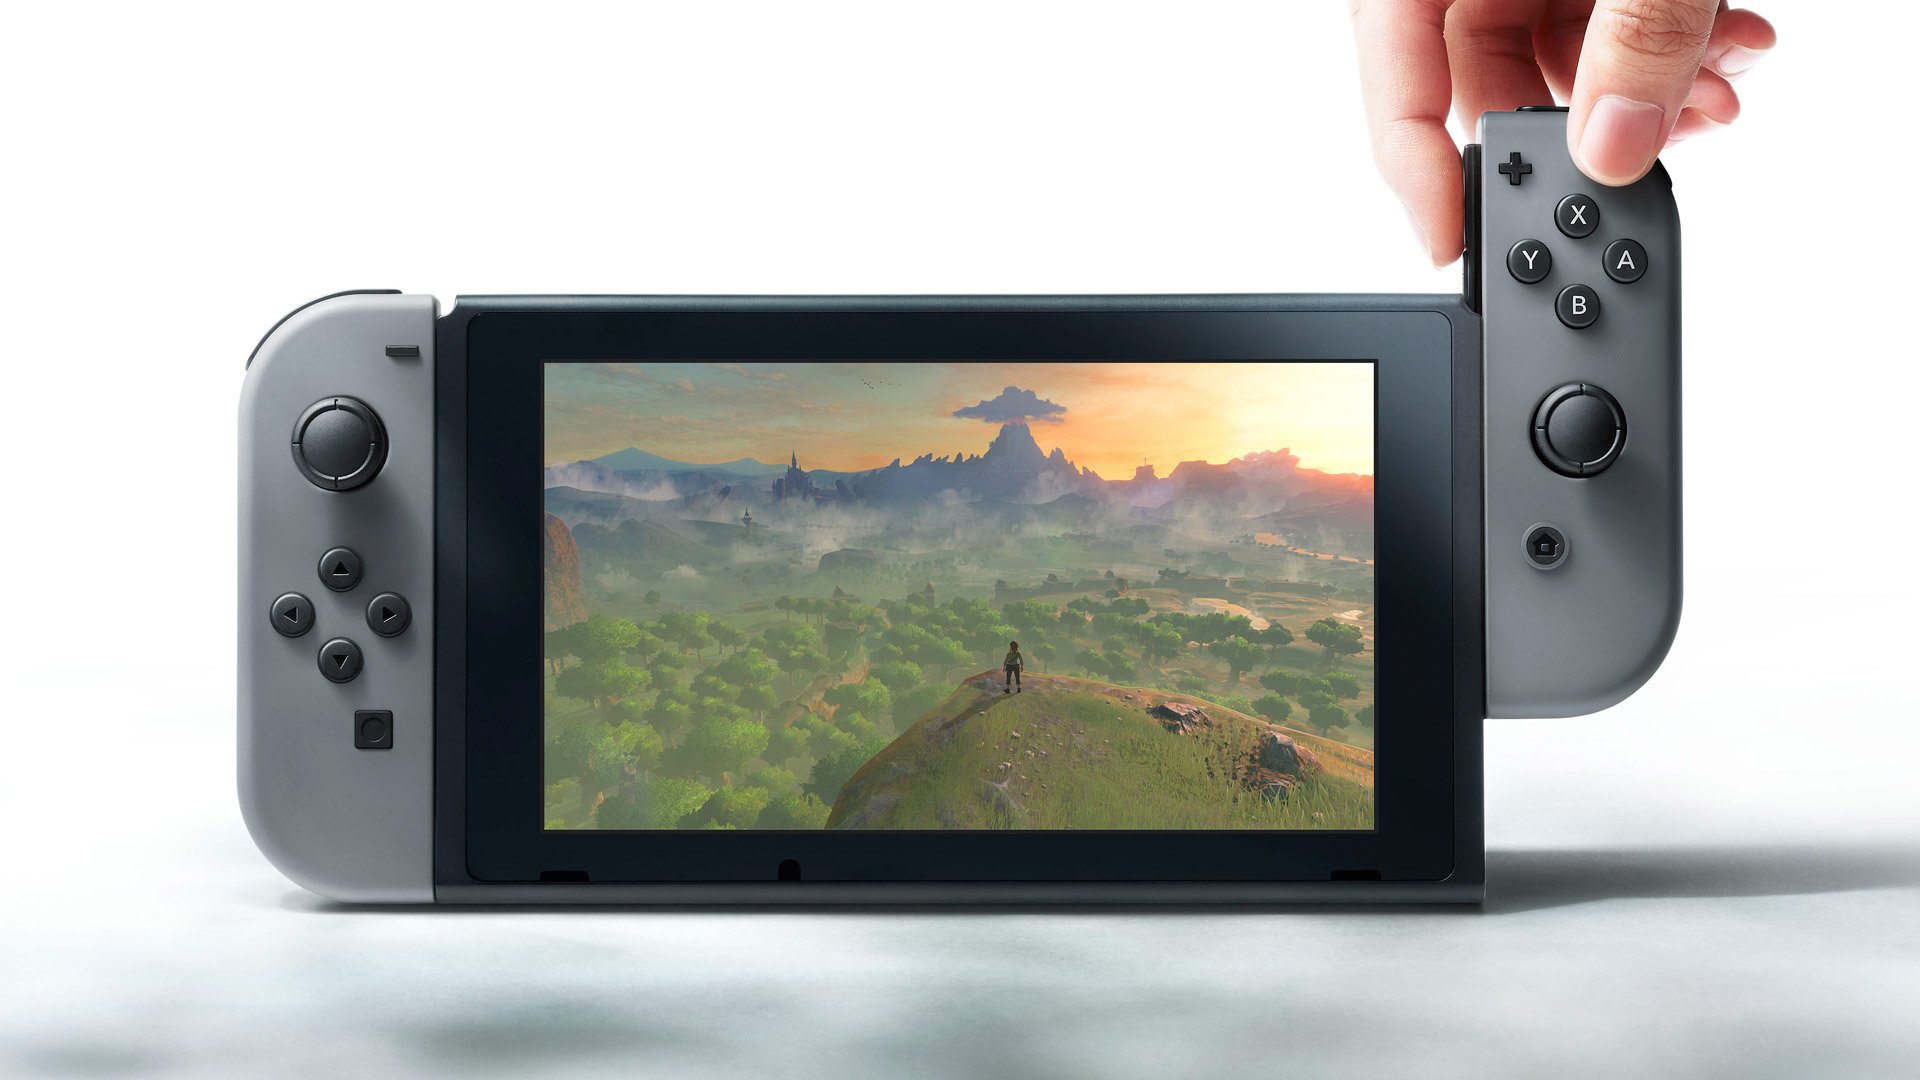 Nintendo Switch Demonstrates a Clear Misunderstanding of Mobile